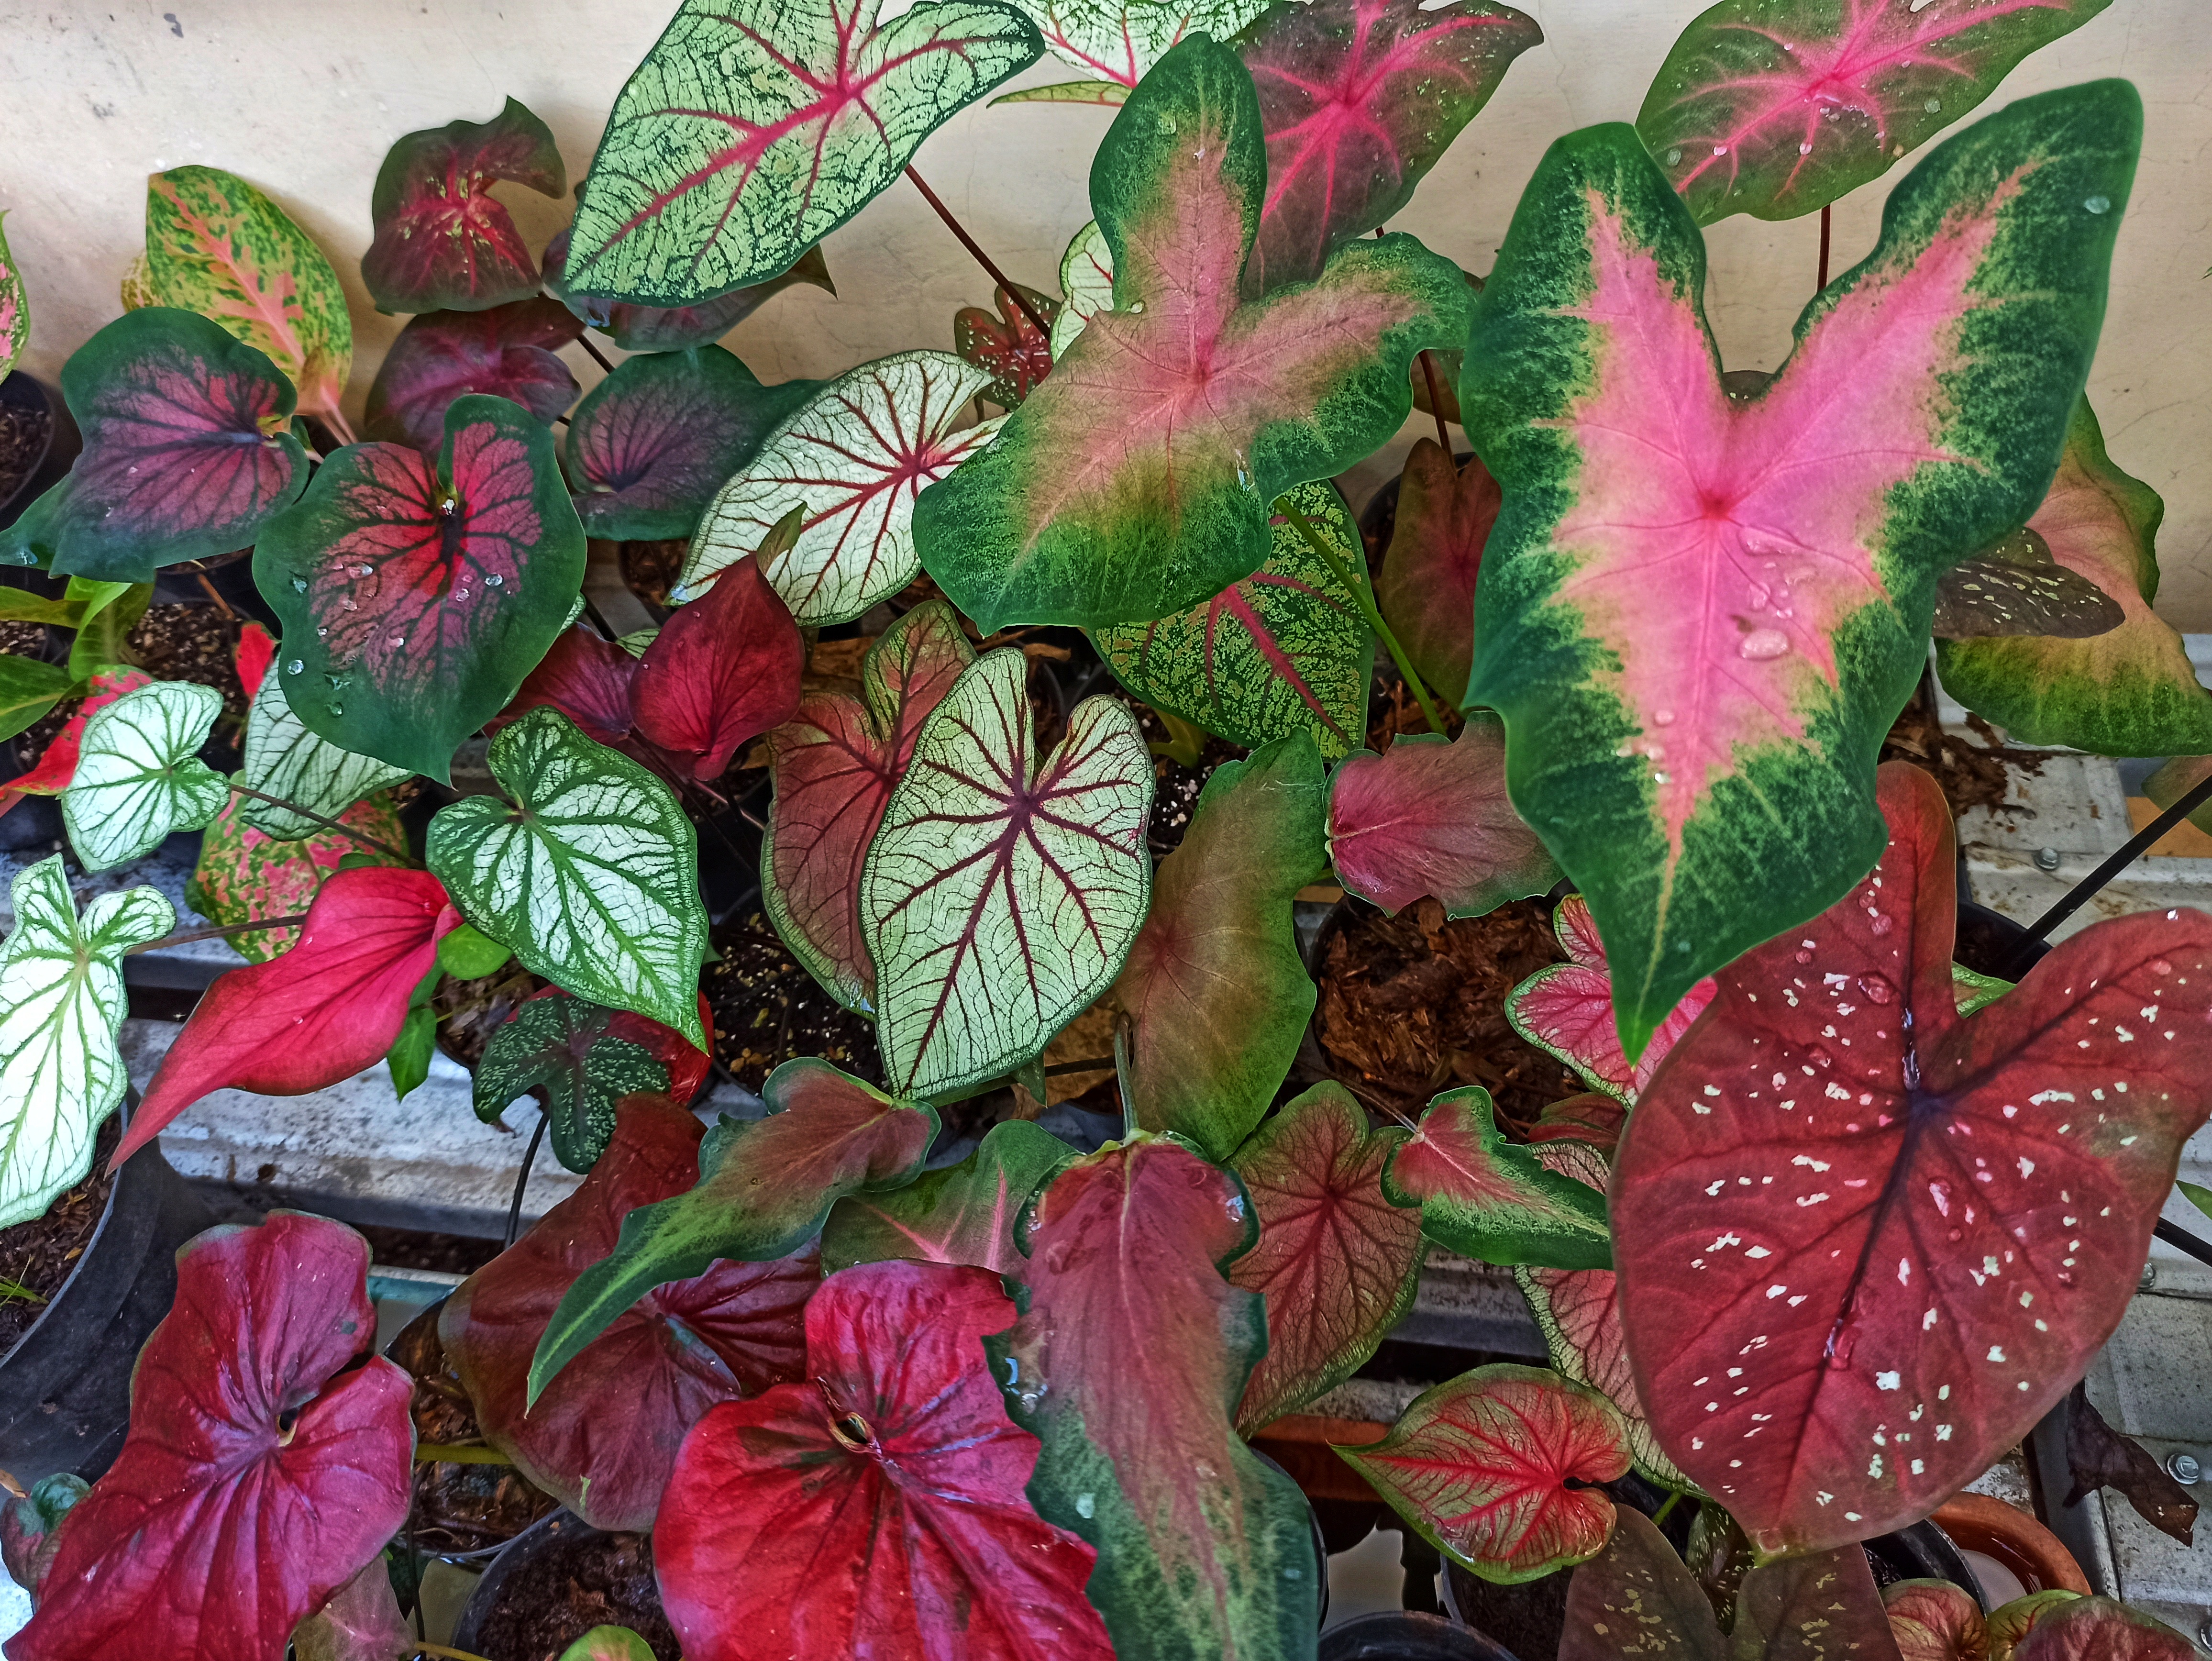 The Best Way to Take Care of Your Caladium